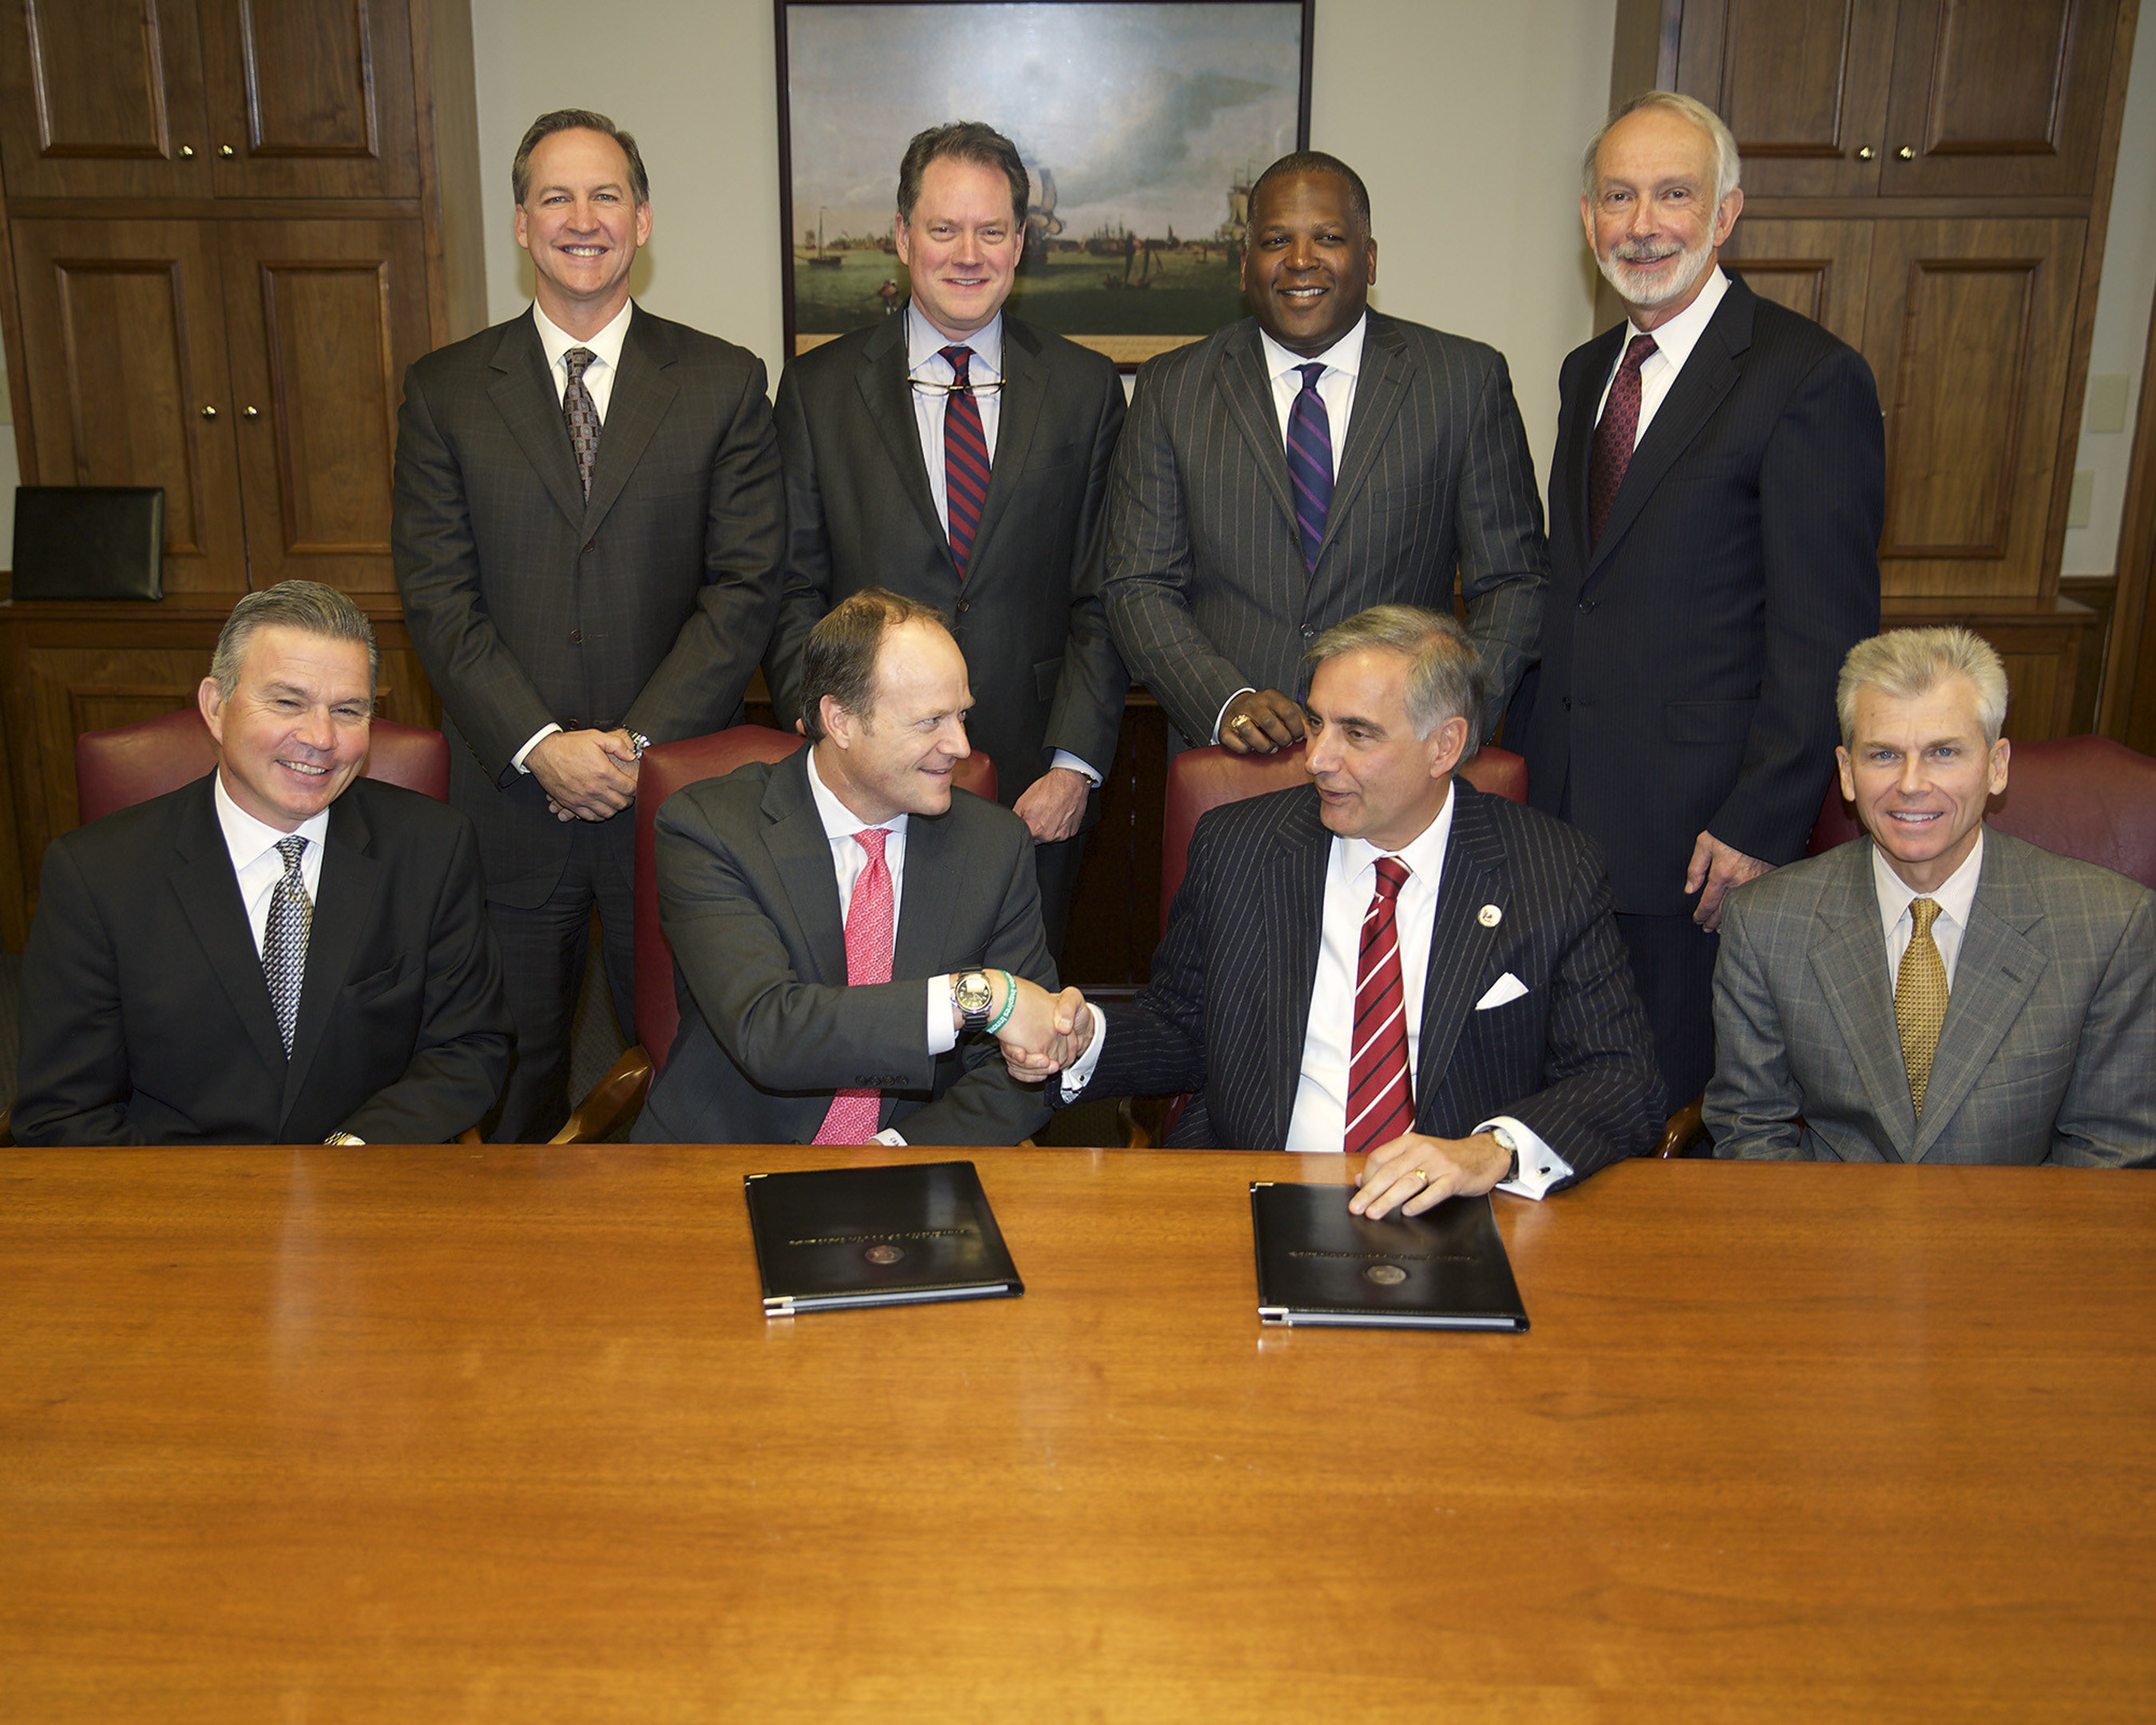 IBM, the University of South Carolina (USC) and Fluor Corporation today announced the formation of the Center for Applied Innovation. (seated from left) Mark Easton, VP, Industry Solution Sales, IBM; Cameron Art, General Manager of Application Management Services, IBM; Harris Pastides, President, USC; Gene Warr, Chairman of the Board of Trustees, USC (standing from left) David Miller, Director, Application Management Services North America, IBM; Andy Bernardin, Director of Enterprise Sales for South...